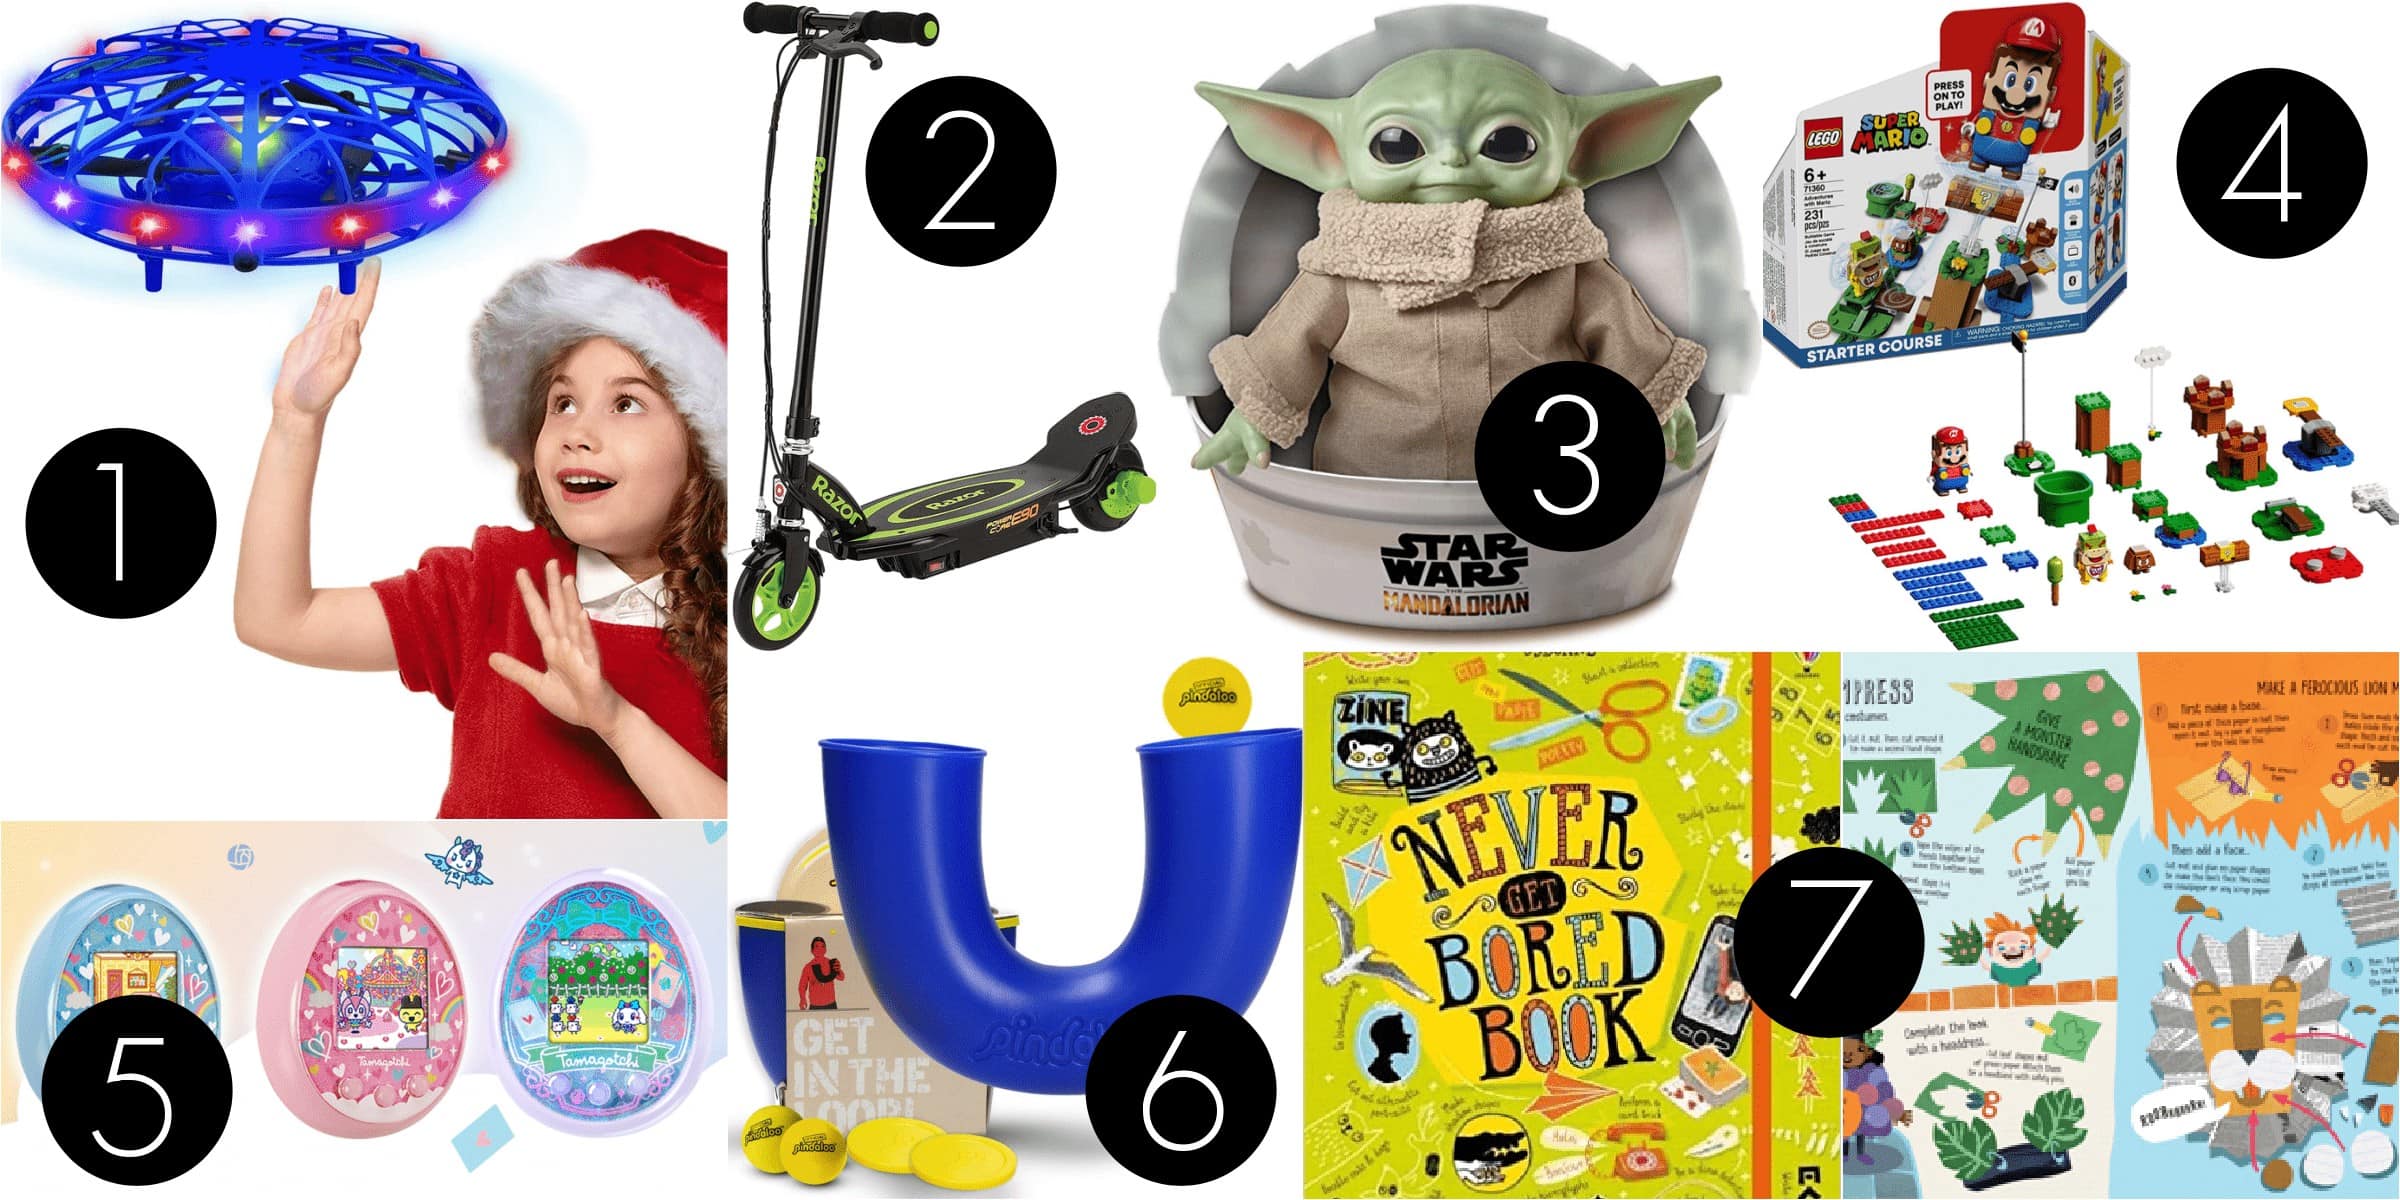 Gifts for kids aged 5-10 years old. 